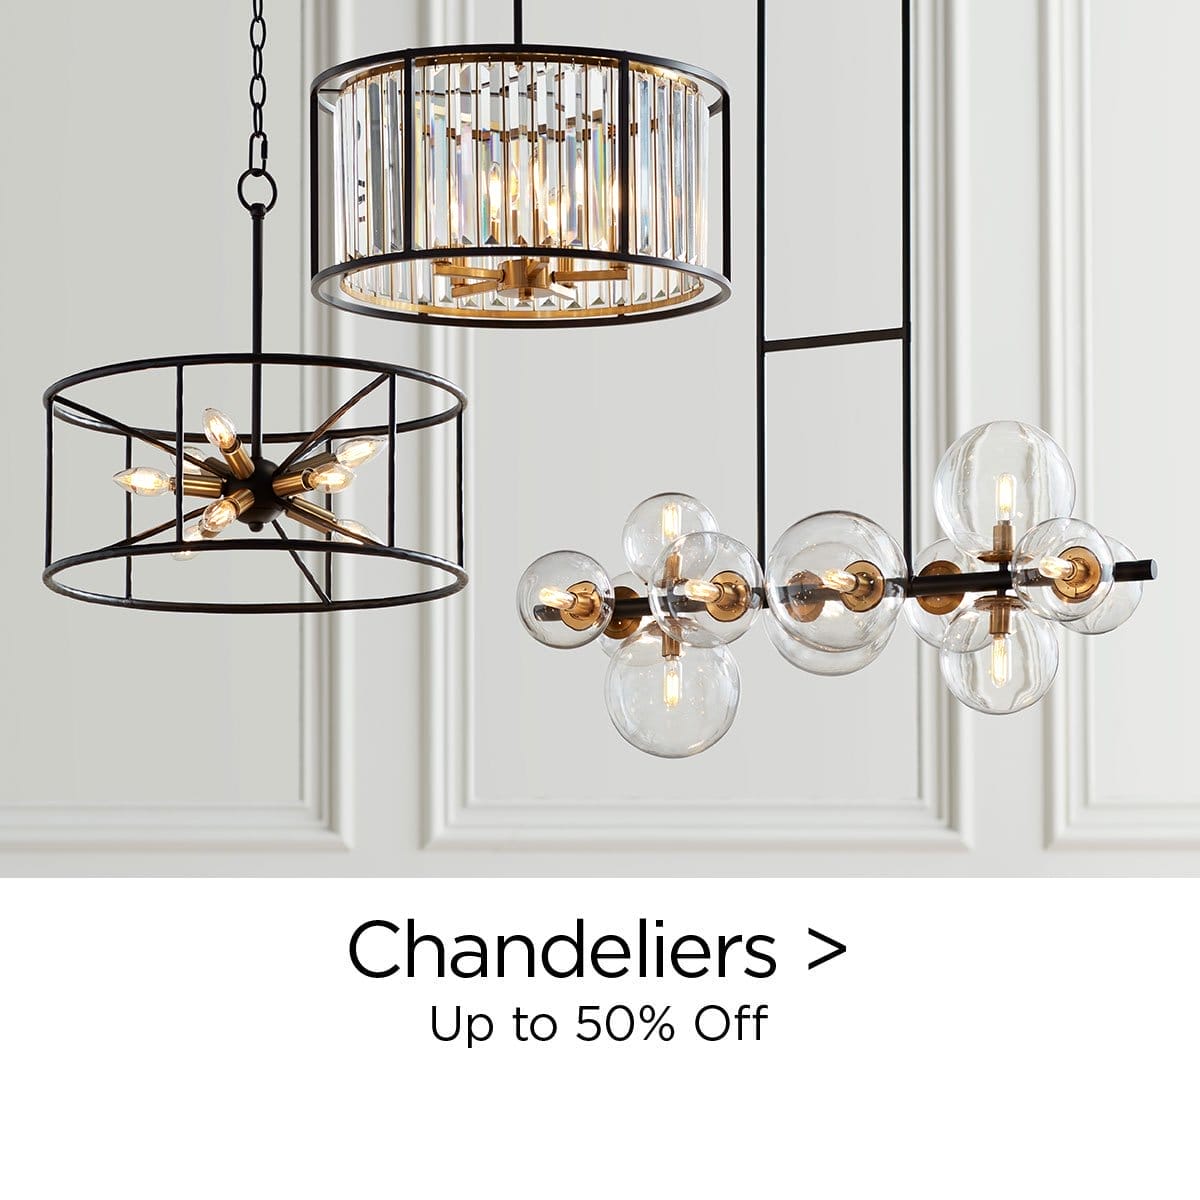 Chandeliers > Up to 50% Off